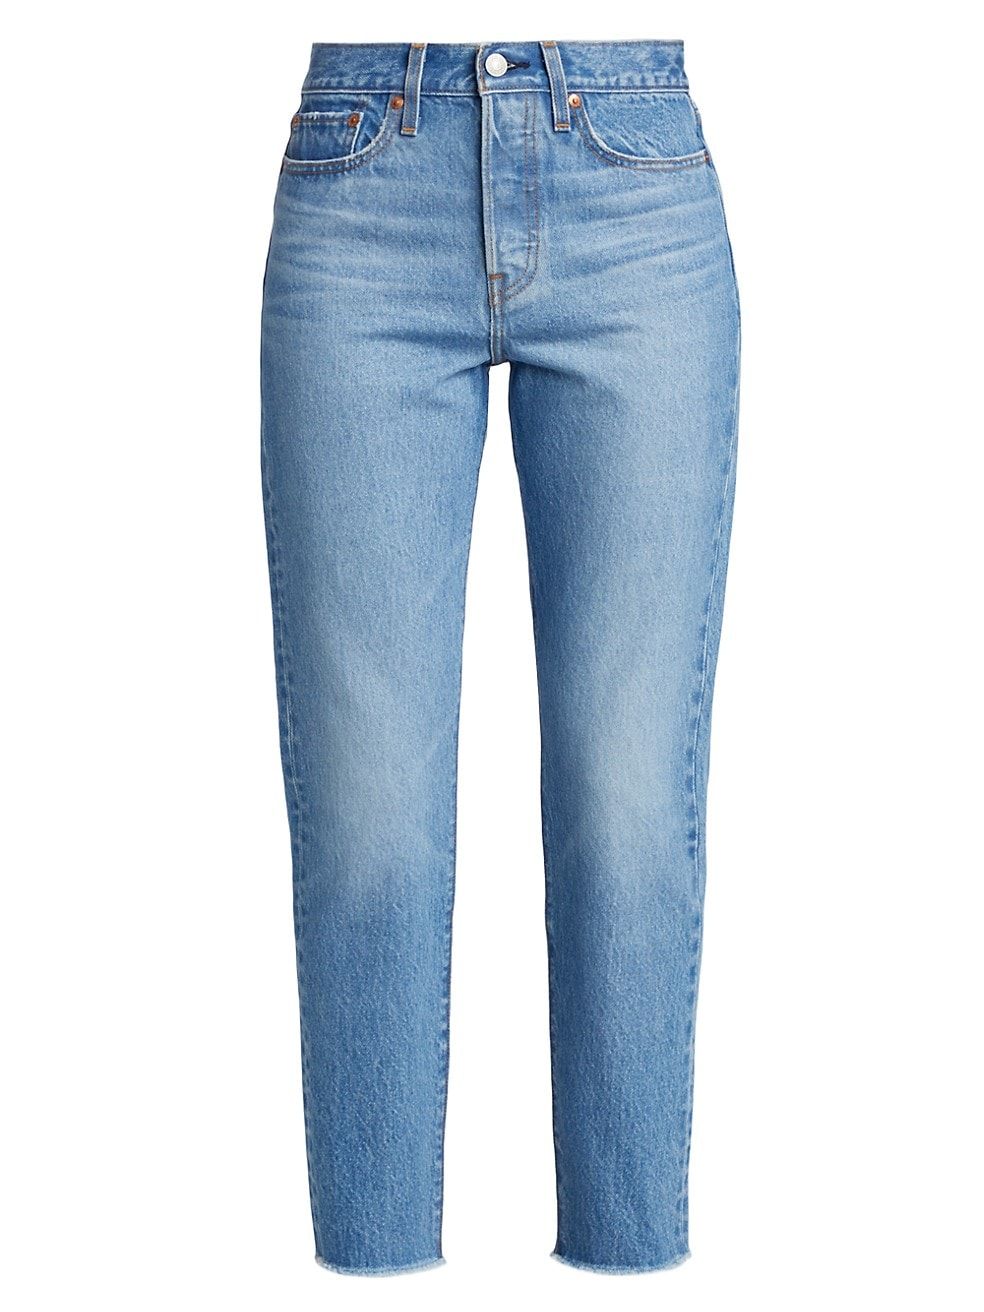 Levi's Long Bottom Wedgie Icon Jeans | Saks Fifth Avenue